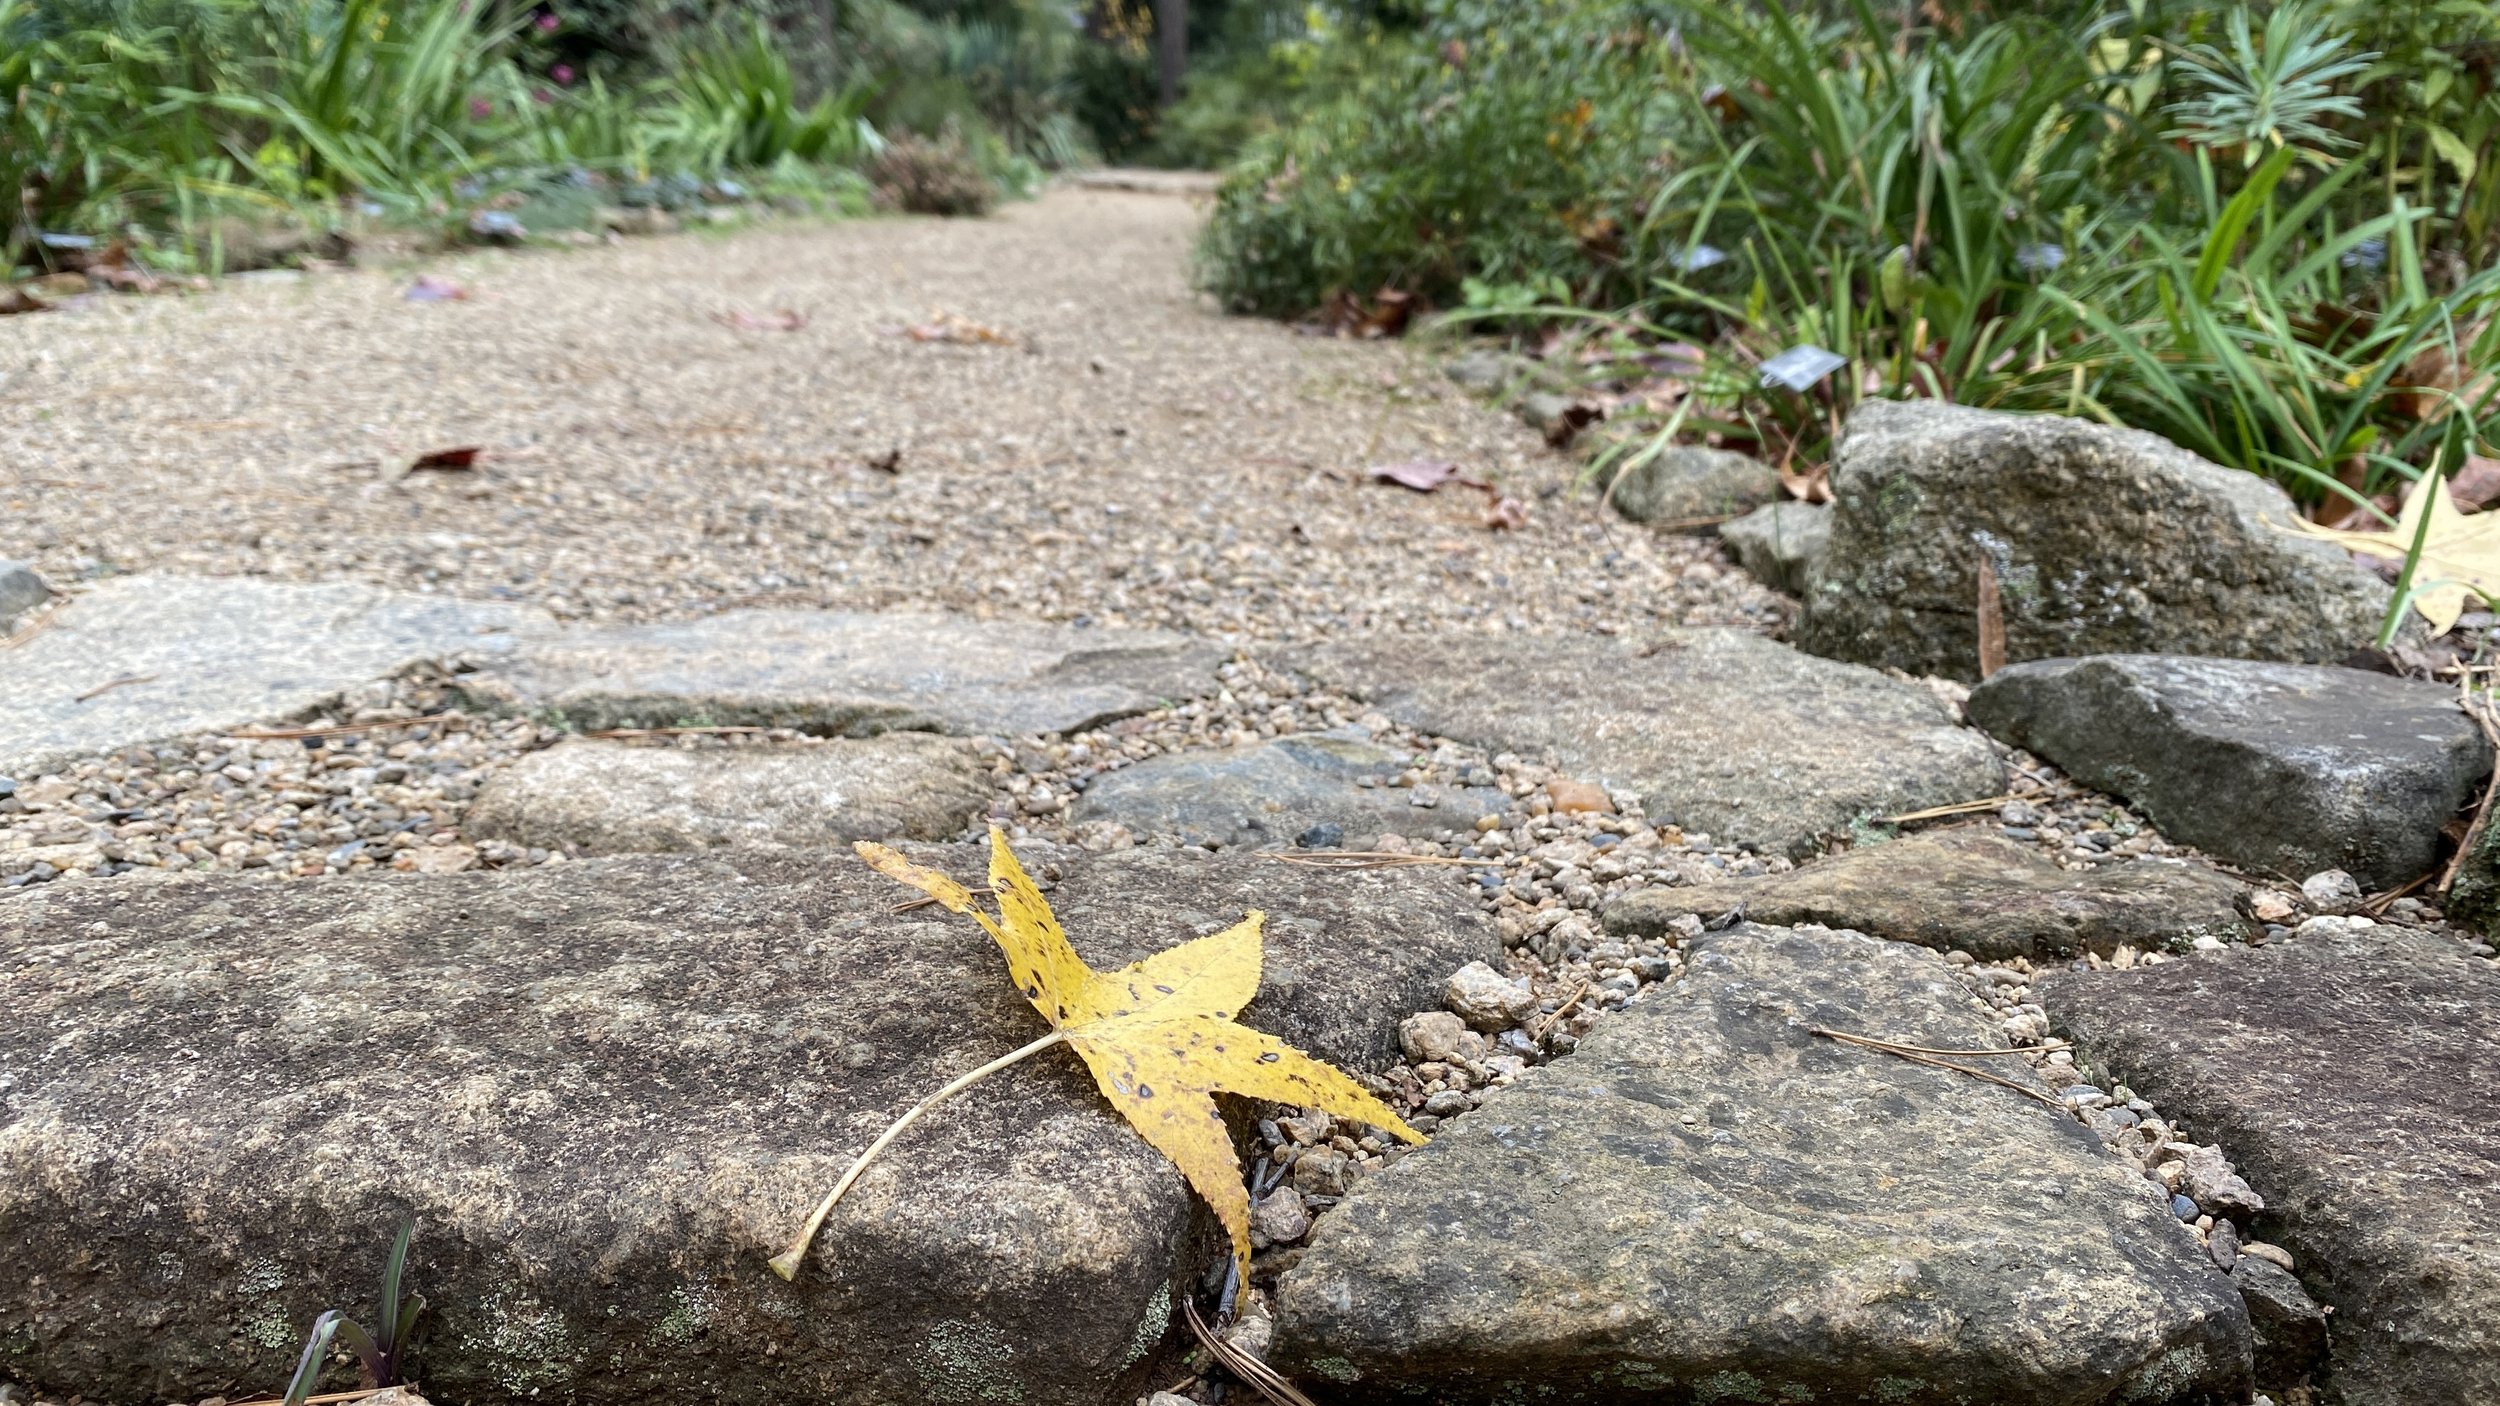  A fallen leaf from the neighbor’s  Liquidambar styraciflua  (American sweetgum) on the landing to the lower path reminds me of a leaf on a stream. 